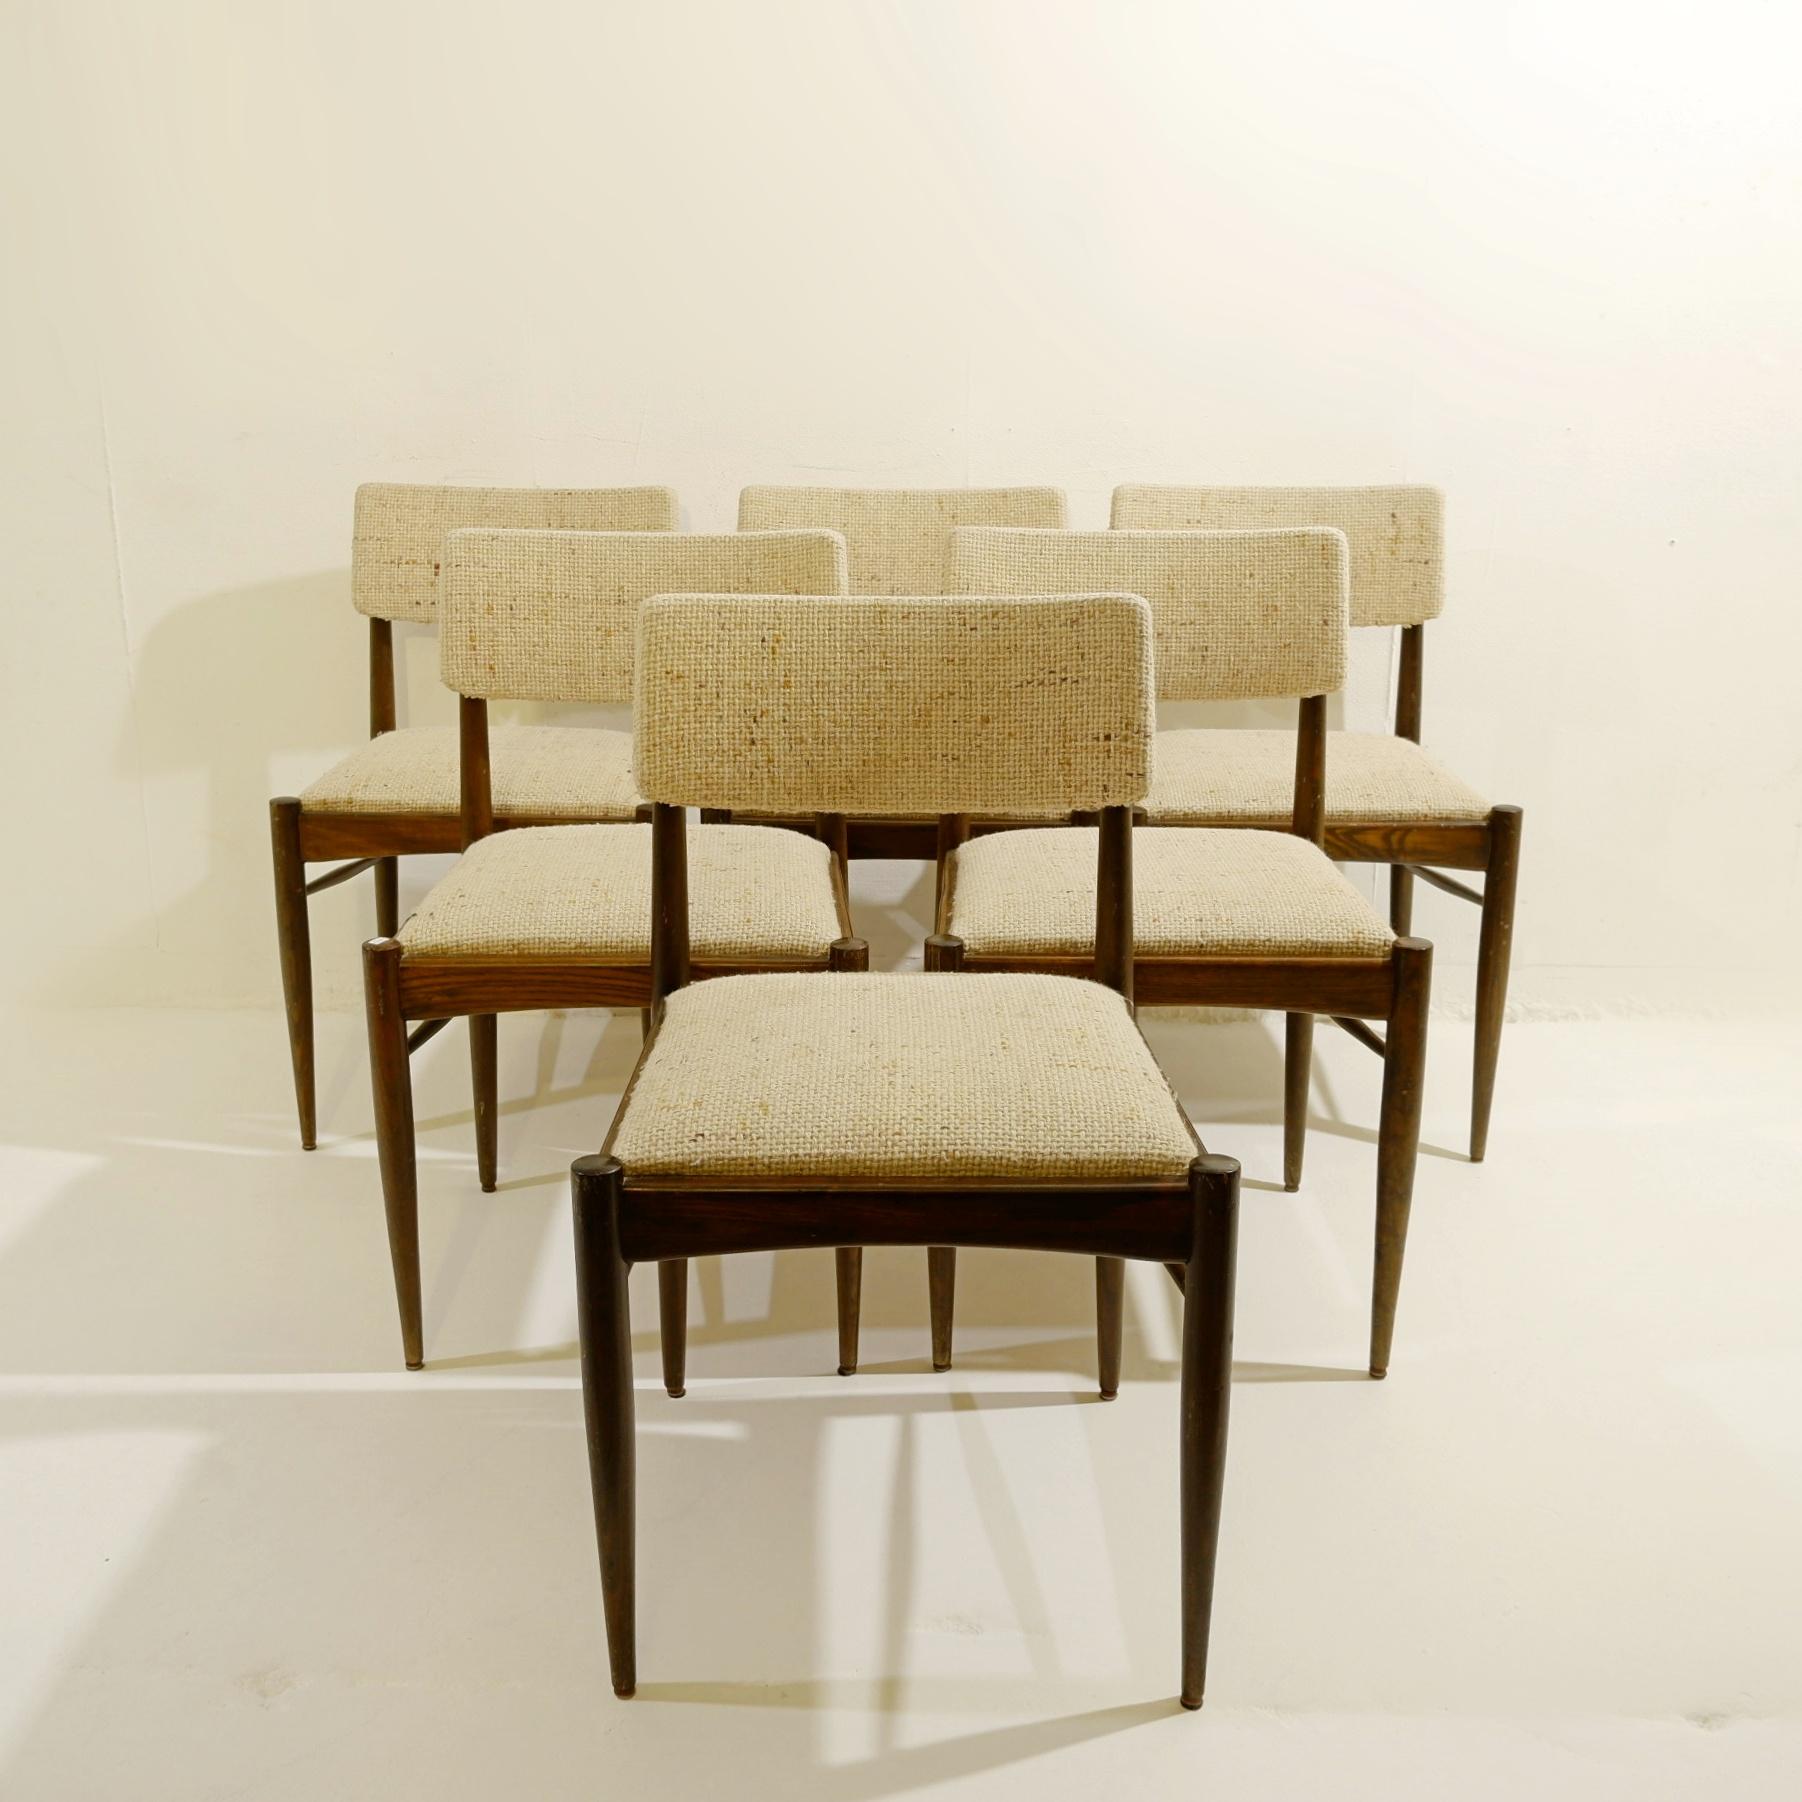 Beautiful set of 6 vintage chairs.